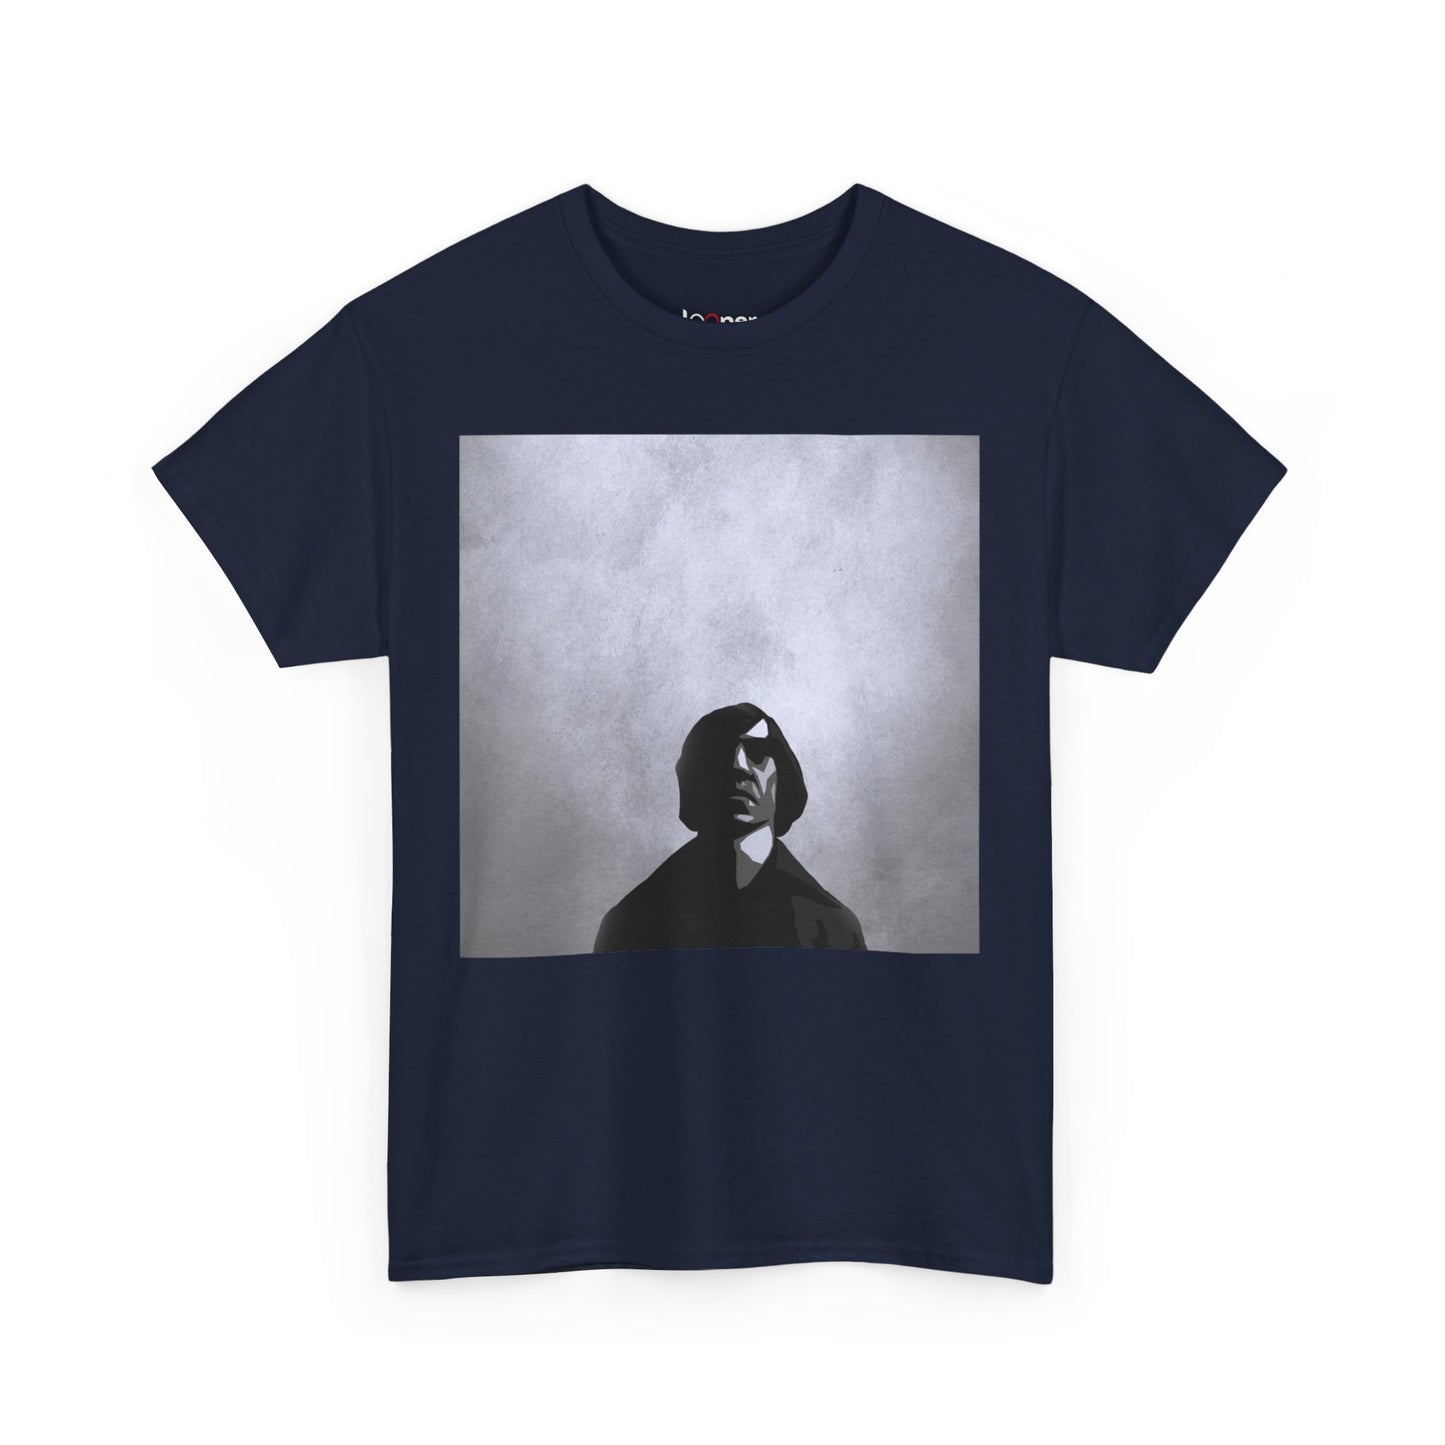 No Country For Old Men - Minimalist Printed T-Shirt